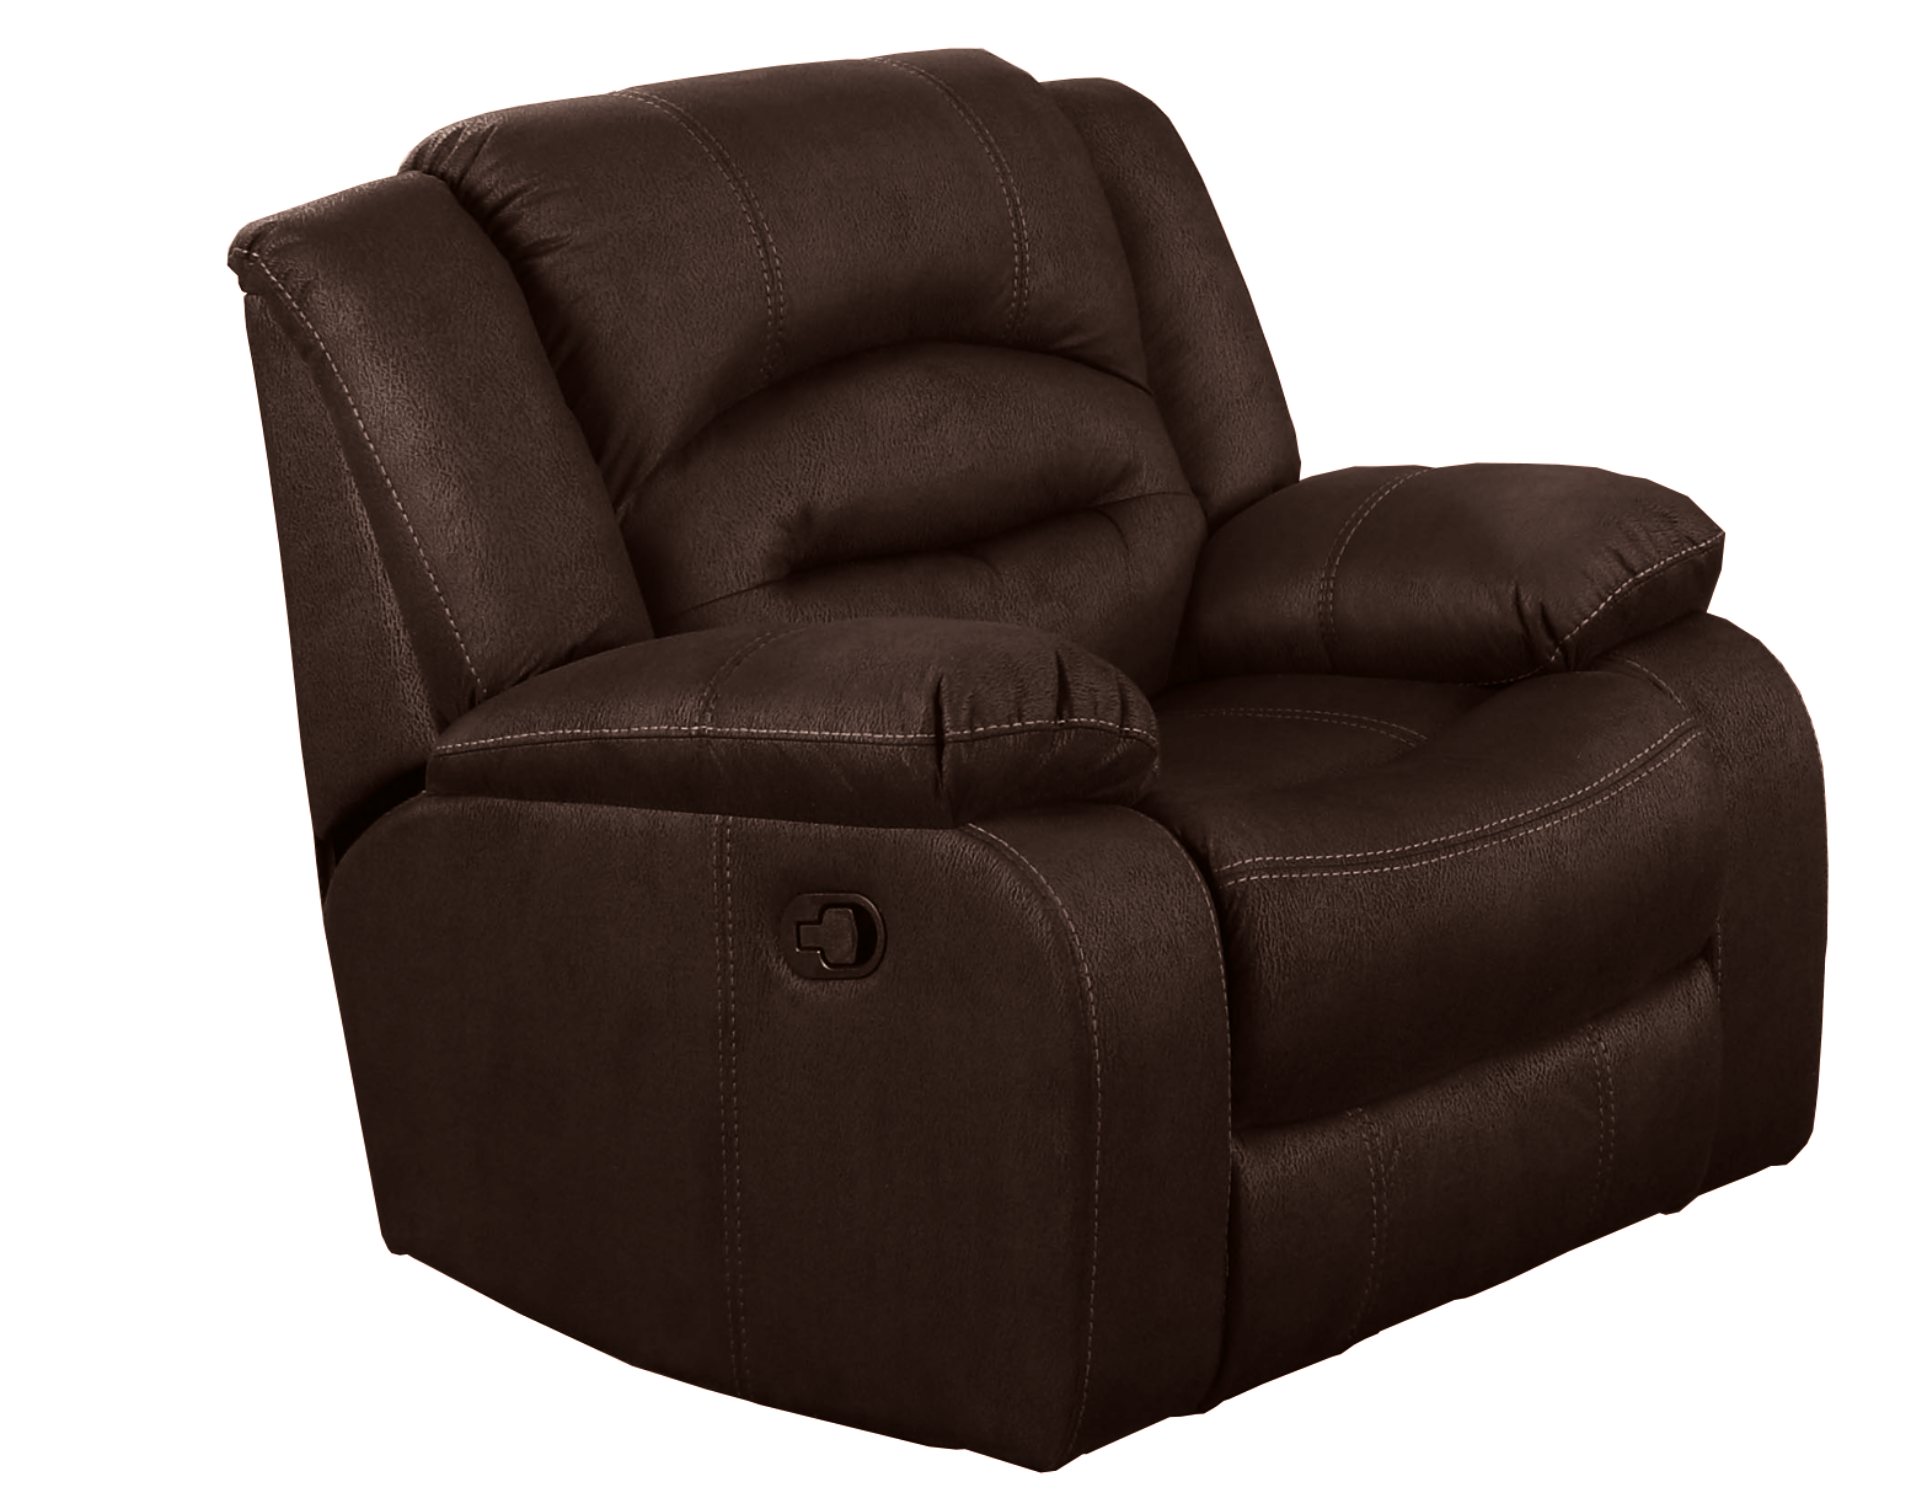 Brown Recliner Chair With Couch Living Room